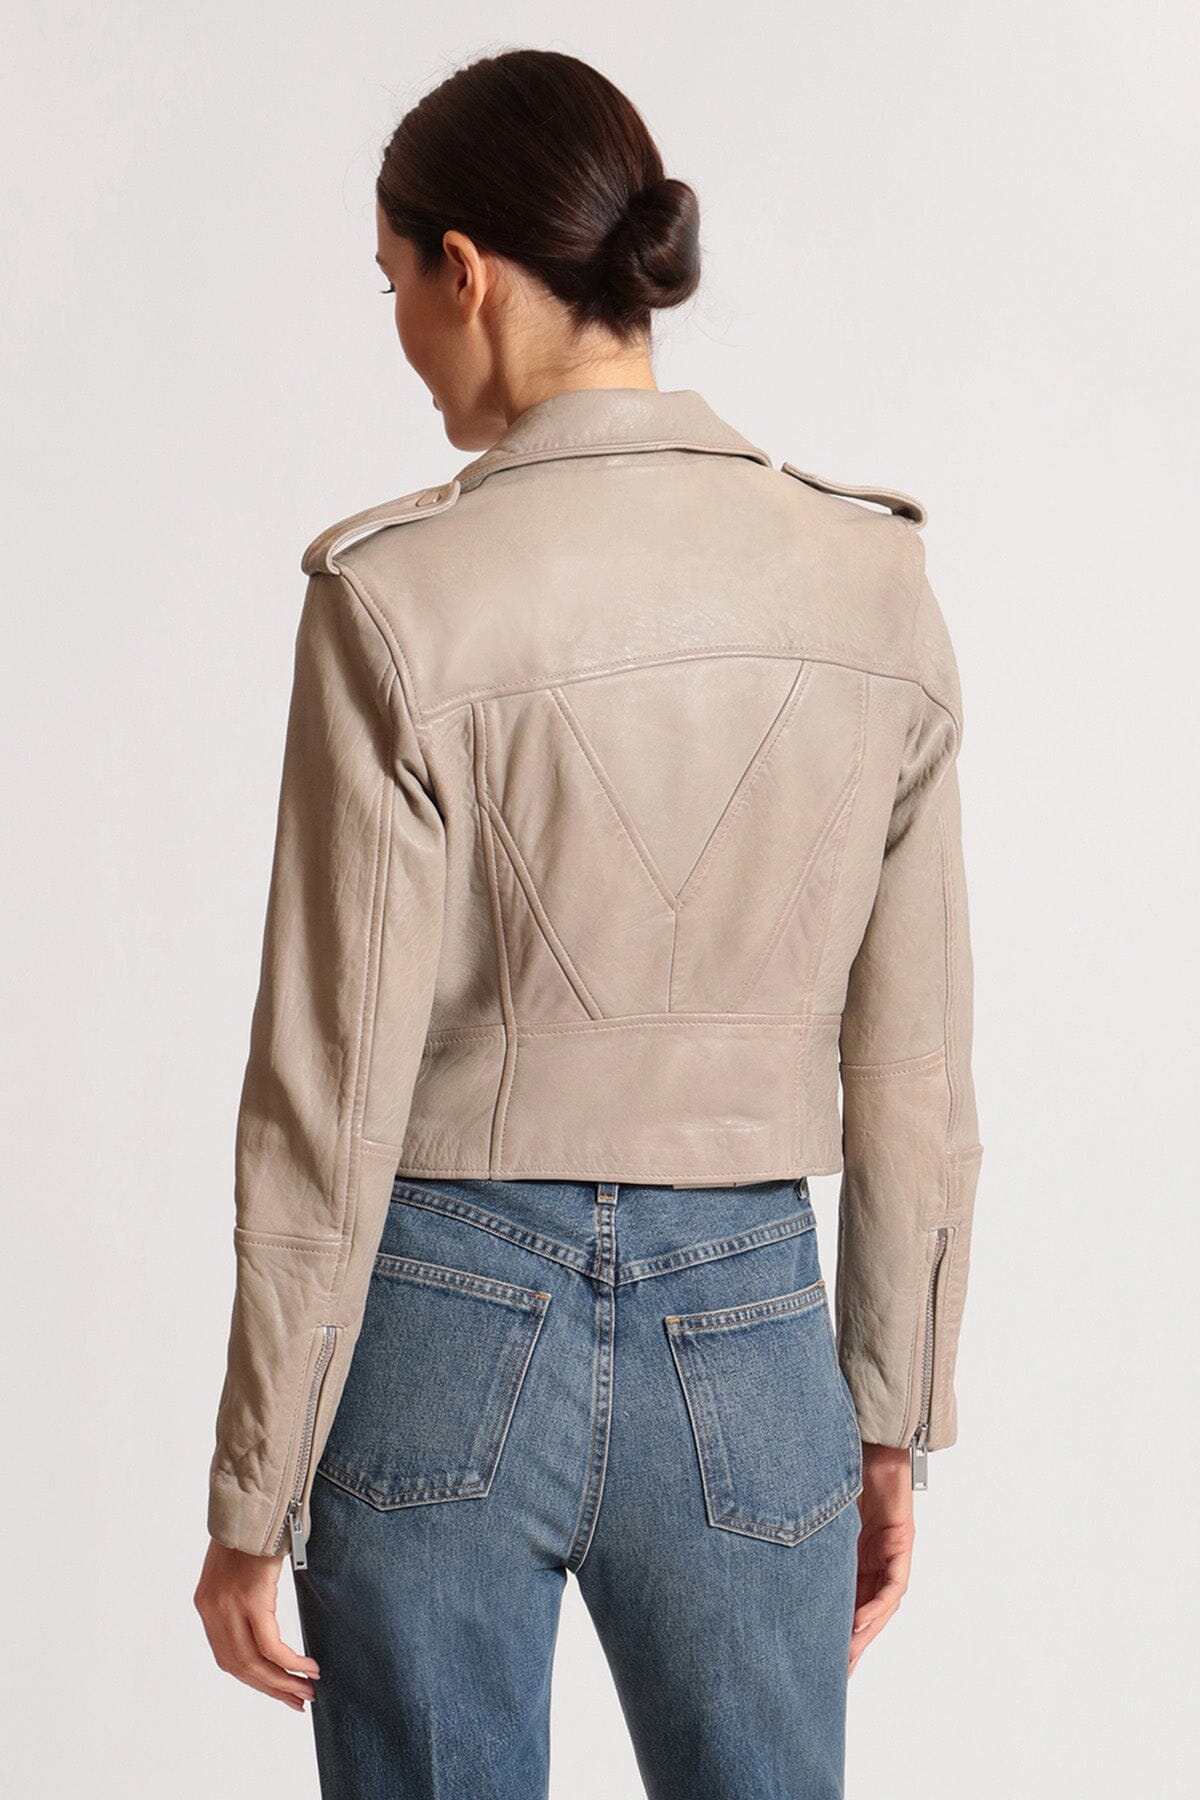 Pear grey genuine leather cropped biker jacket coat - women's figure flattering casual to dressy crop jackets coats for Fall 2023 trends